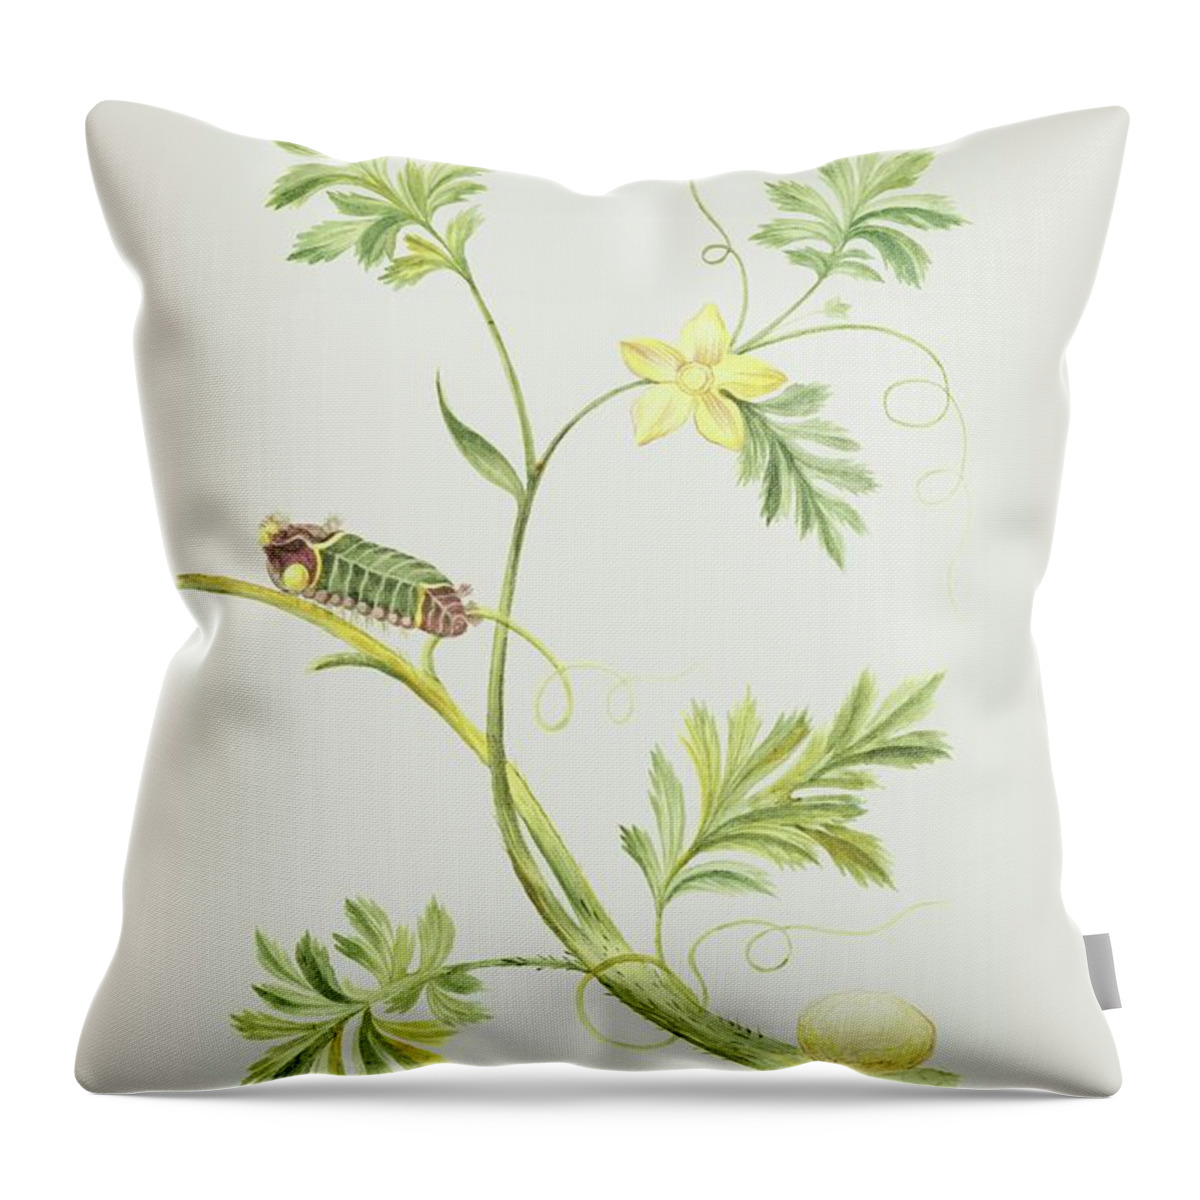 Caterpillar Throw Pillow featuring the mixed media Caterpillar With Pupa On A Plant by Cornelis Markee 1763 by Movie Poster Prints